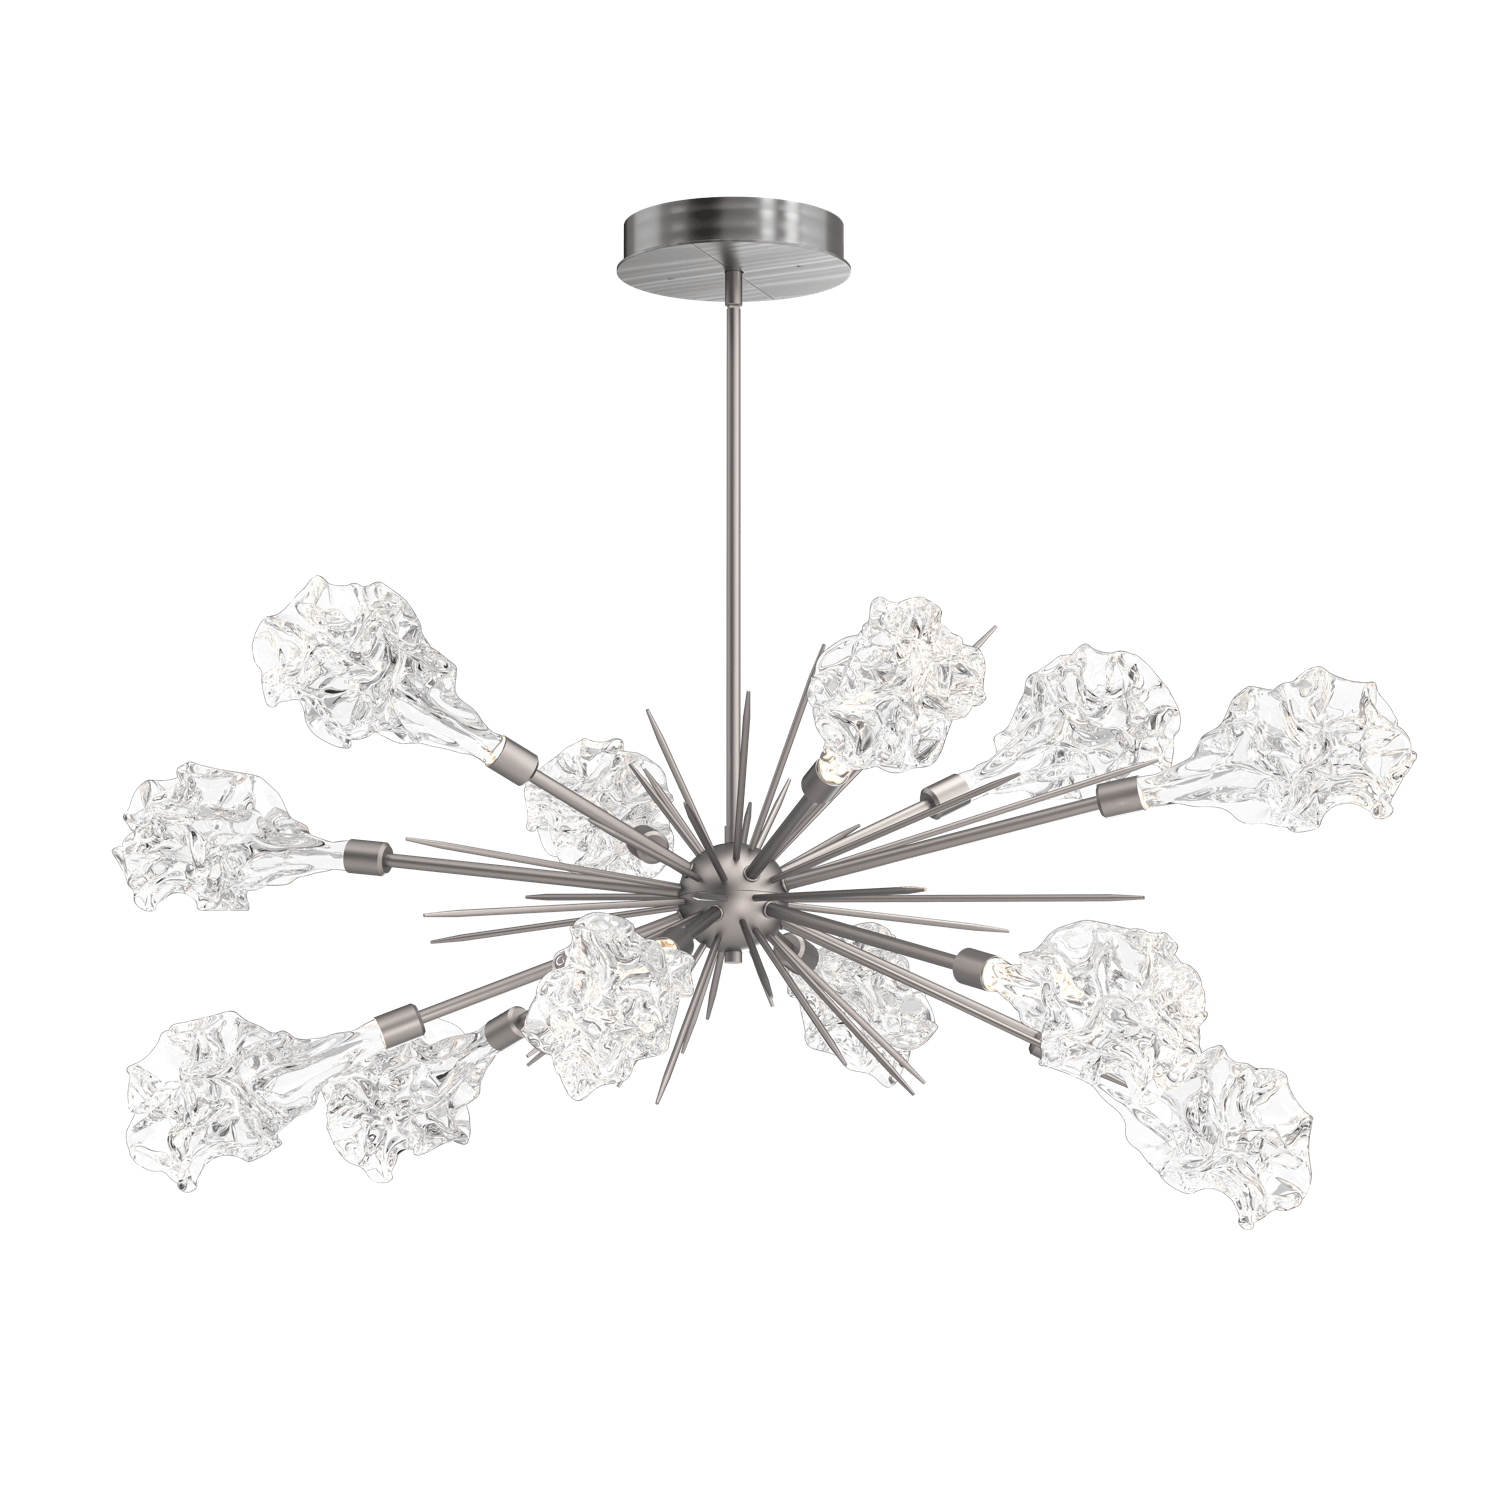 PLB0059-0A-SN-Hammerton-Studio-Blossom-47-inch-oval-starburst-chandelier-with-satin-nickel-finish-and-clear-handblown-crystal-glass-shades-and-LED-lamping